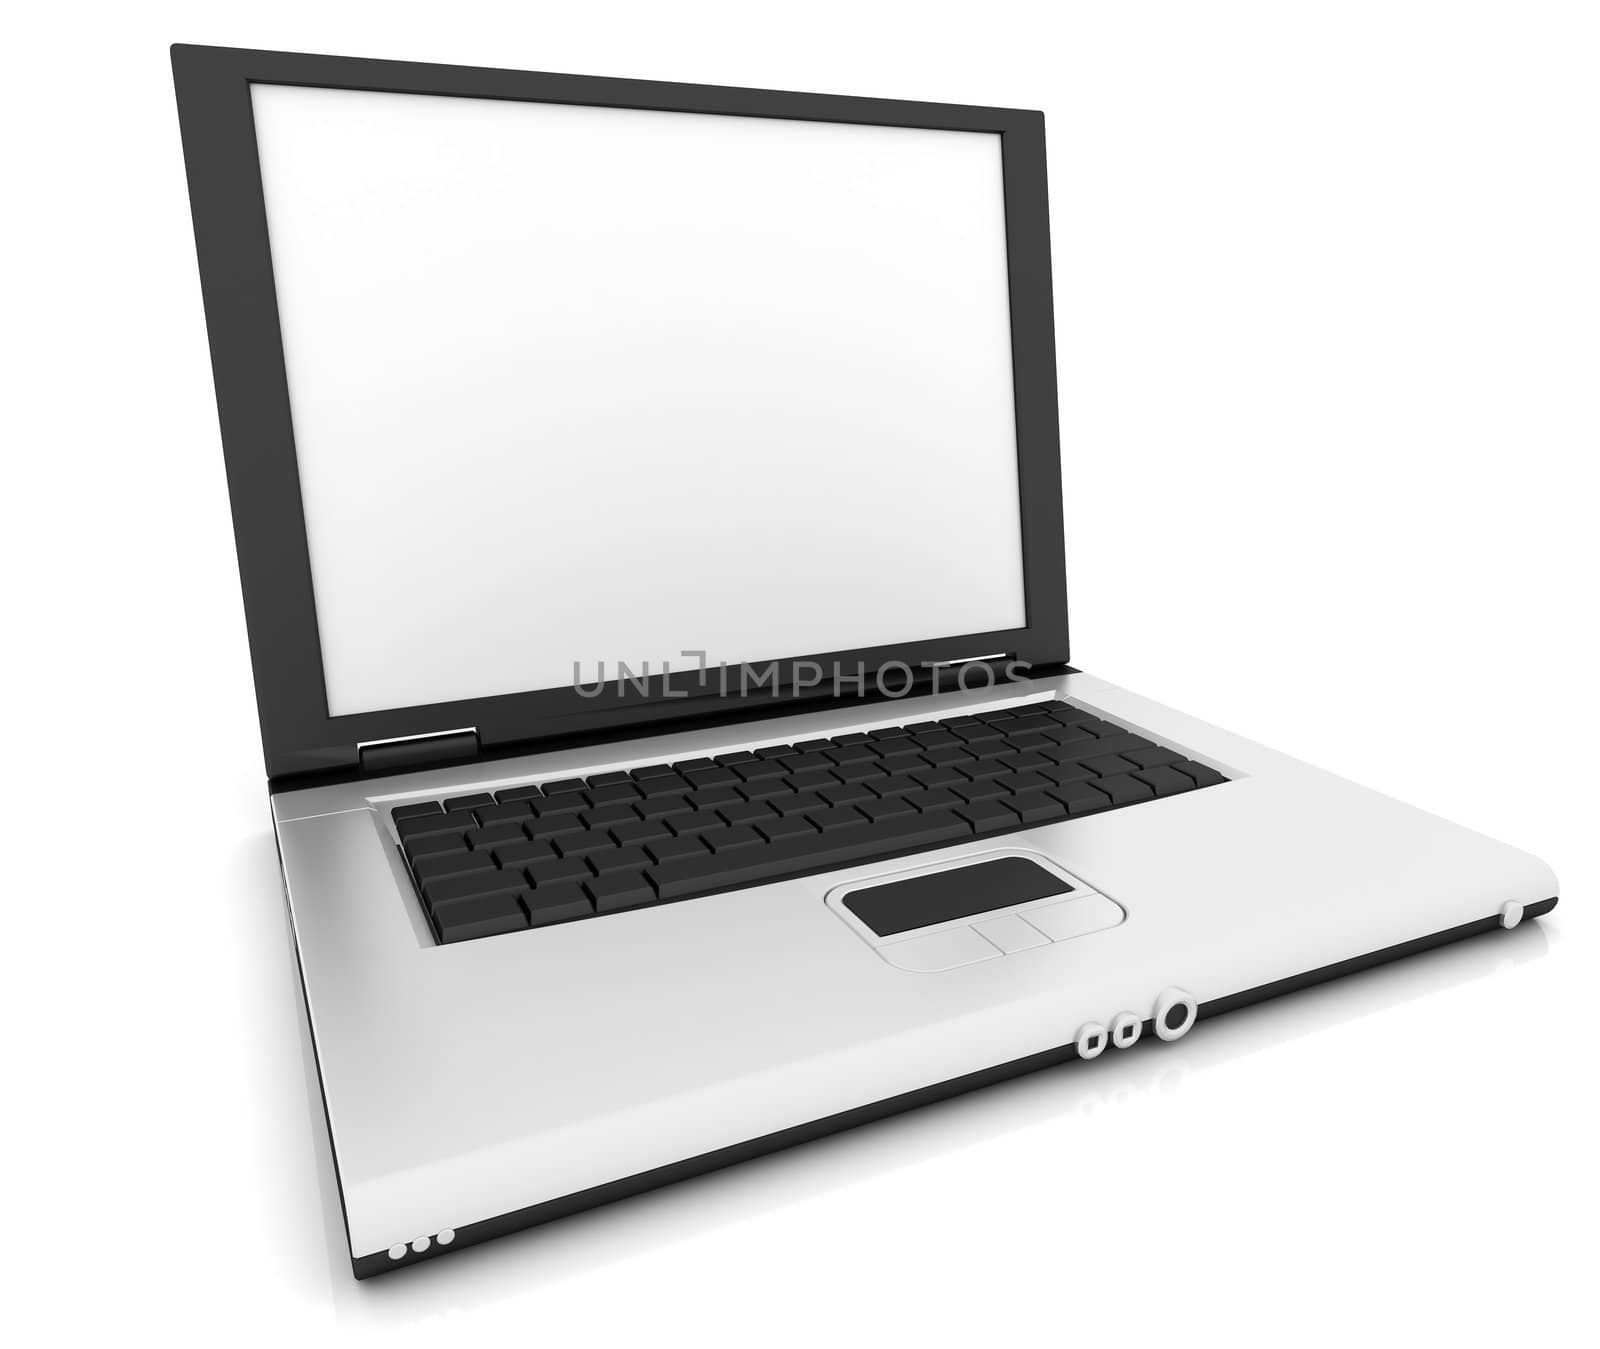 Laptop On White Background by Jalin